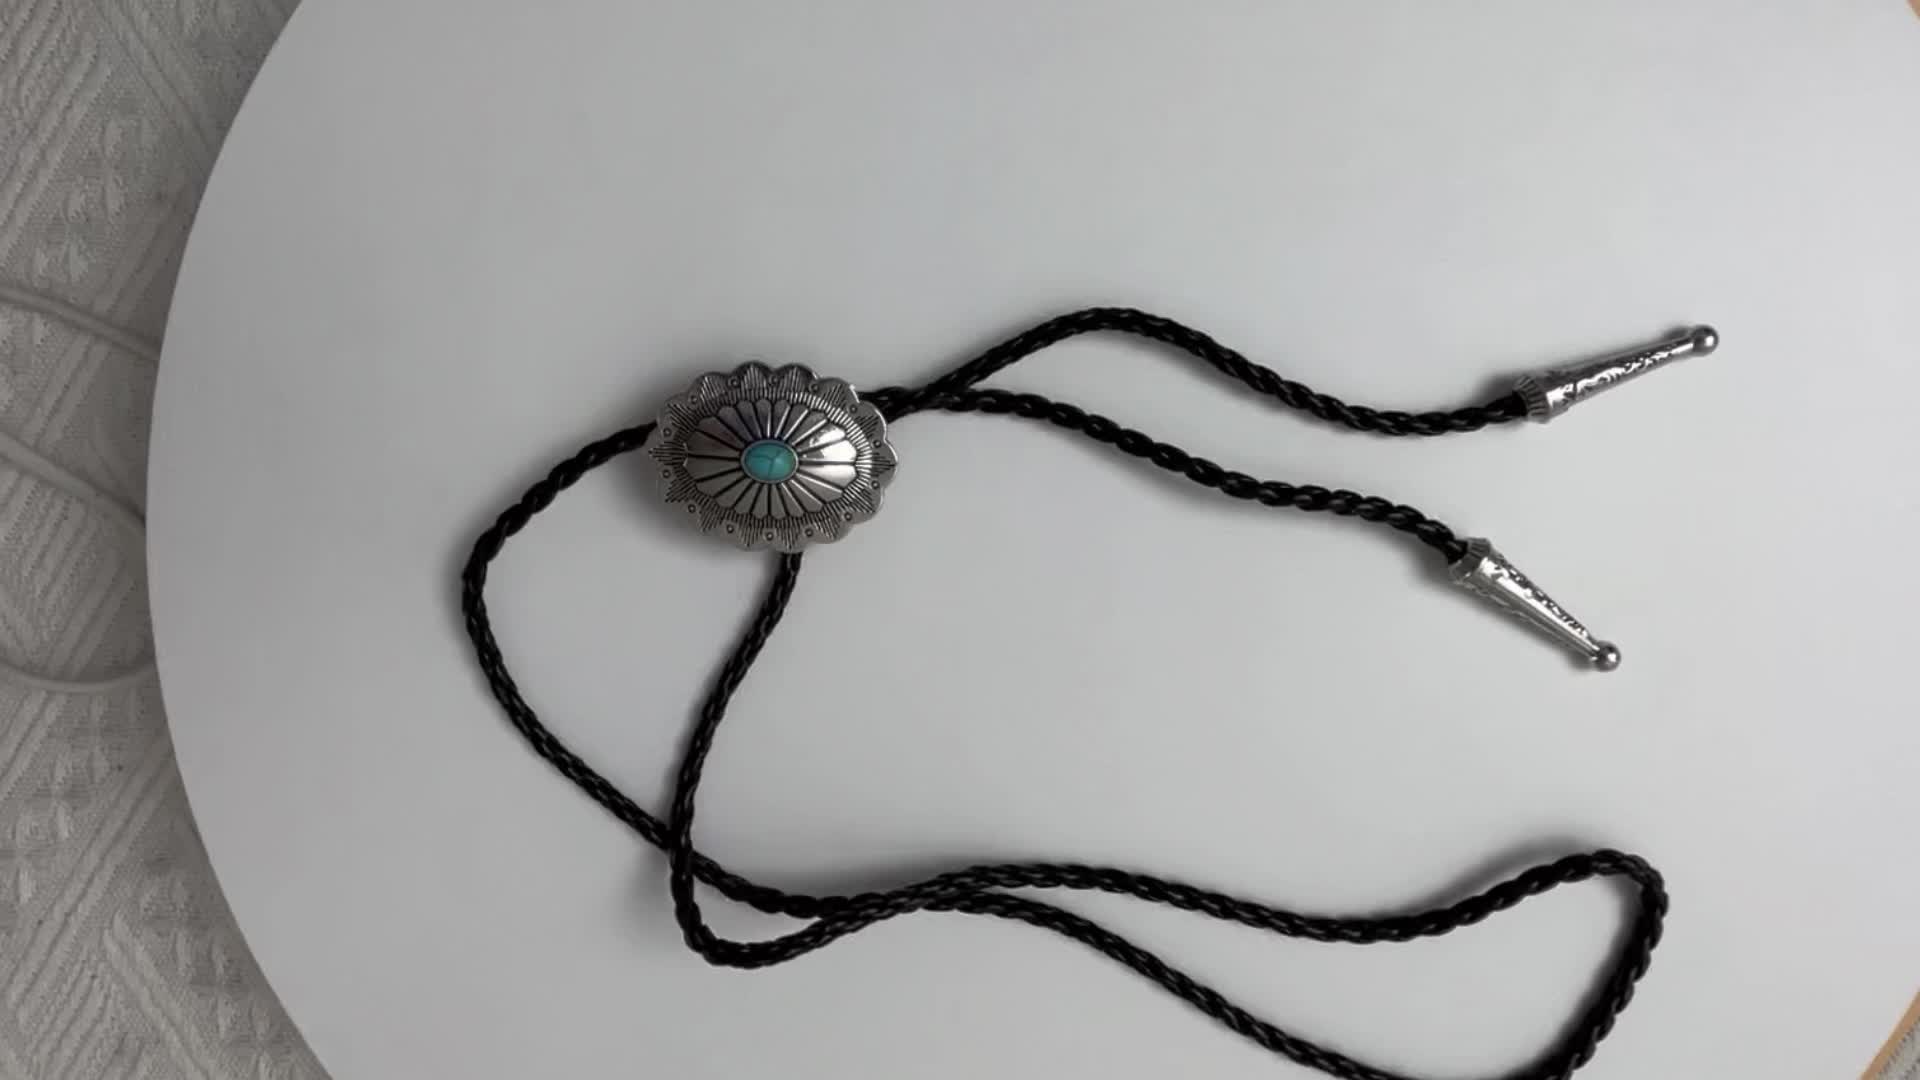 Bolo Tie Supplies - Bolo Slides  Jewelry making, Jewelry projects